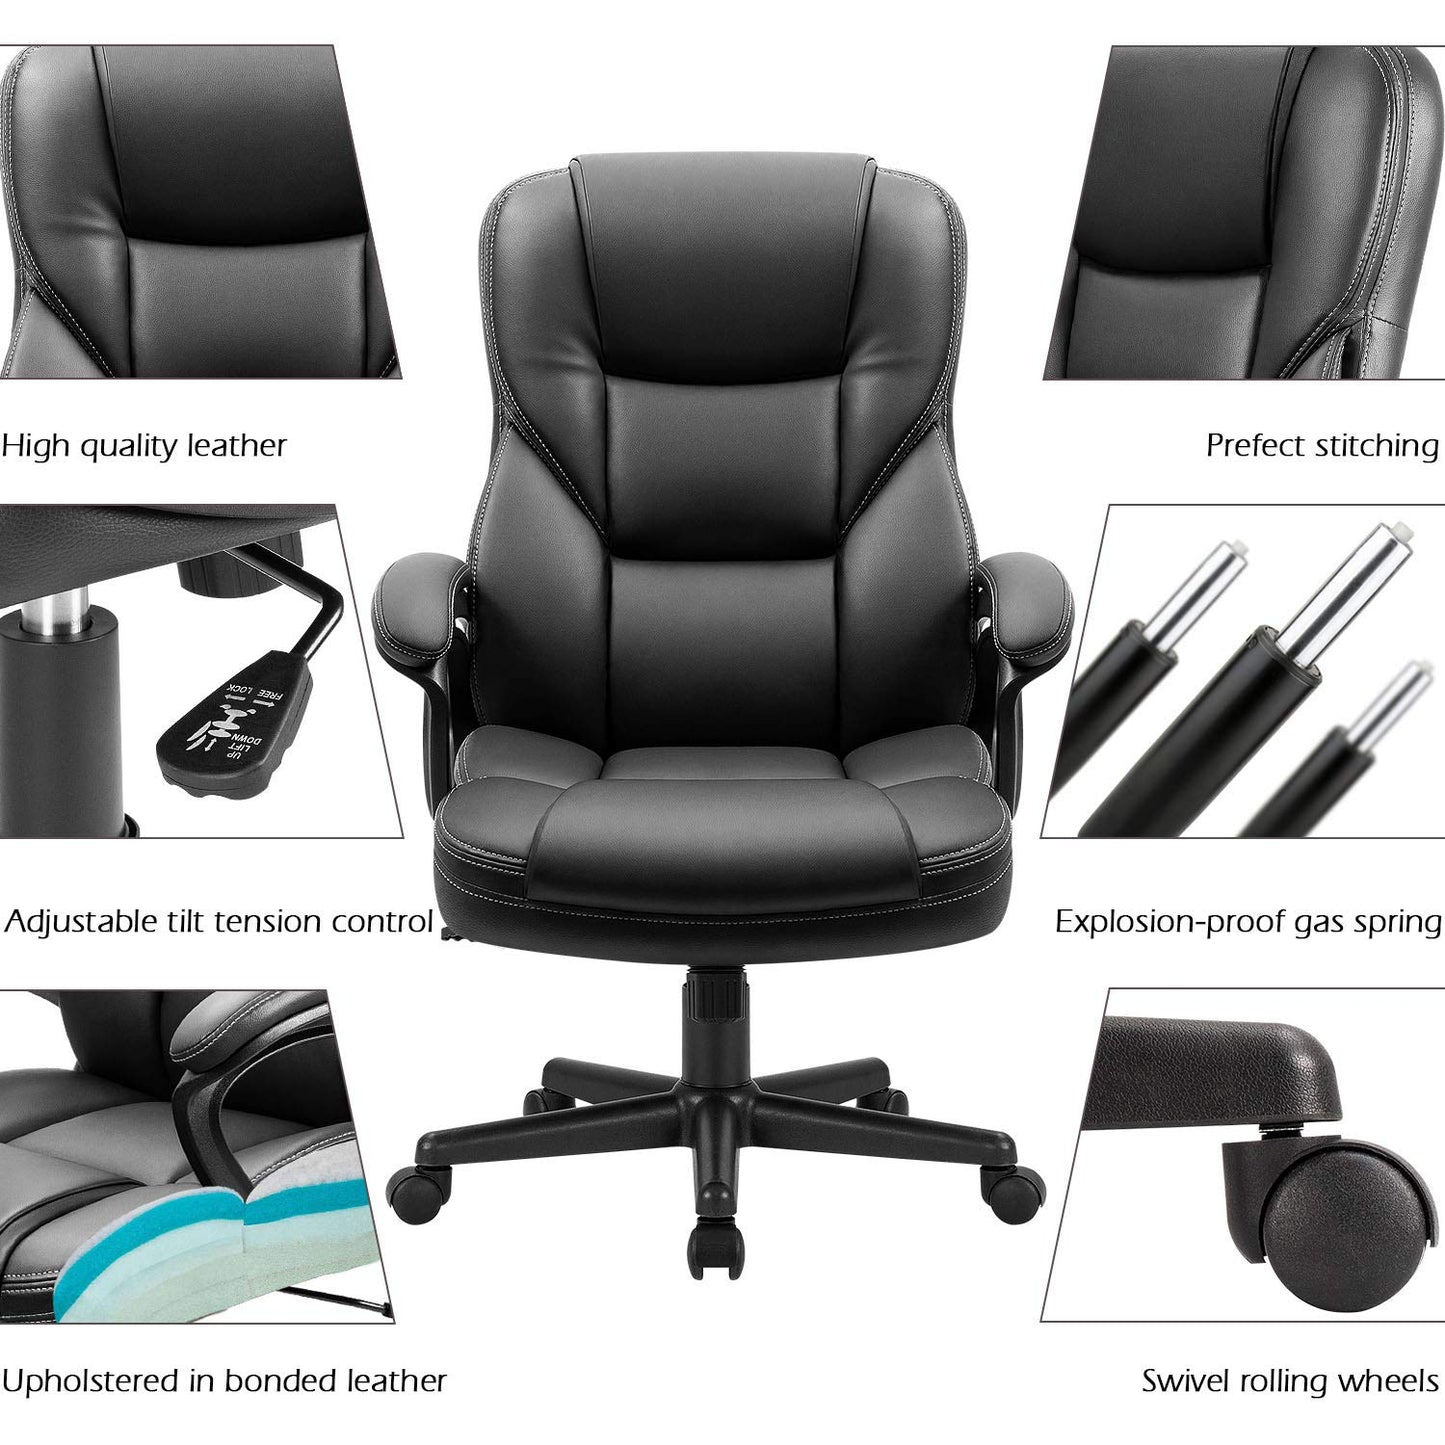 Furmax Office Executive Chair High Back Adjustable Managerial Home Desk Chair, Swivel Computer PU Leather Chair with Lumbar Support (Black)